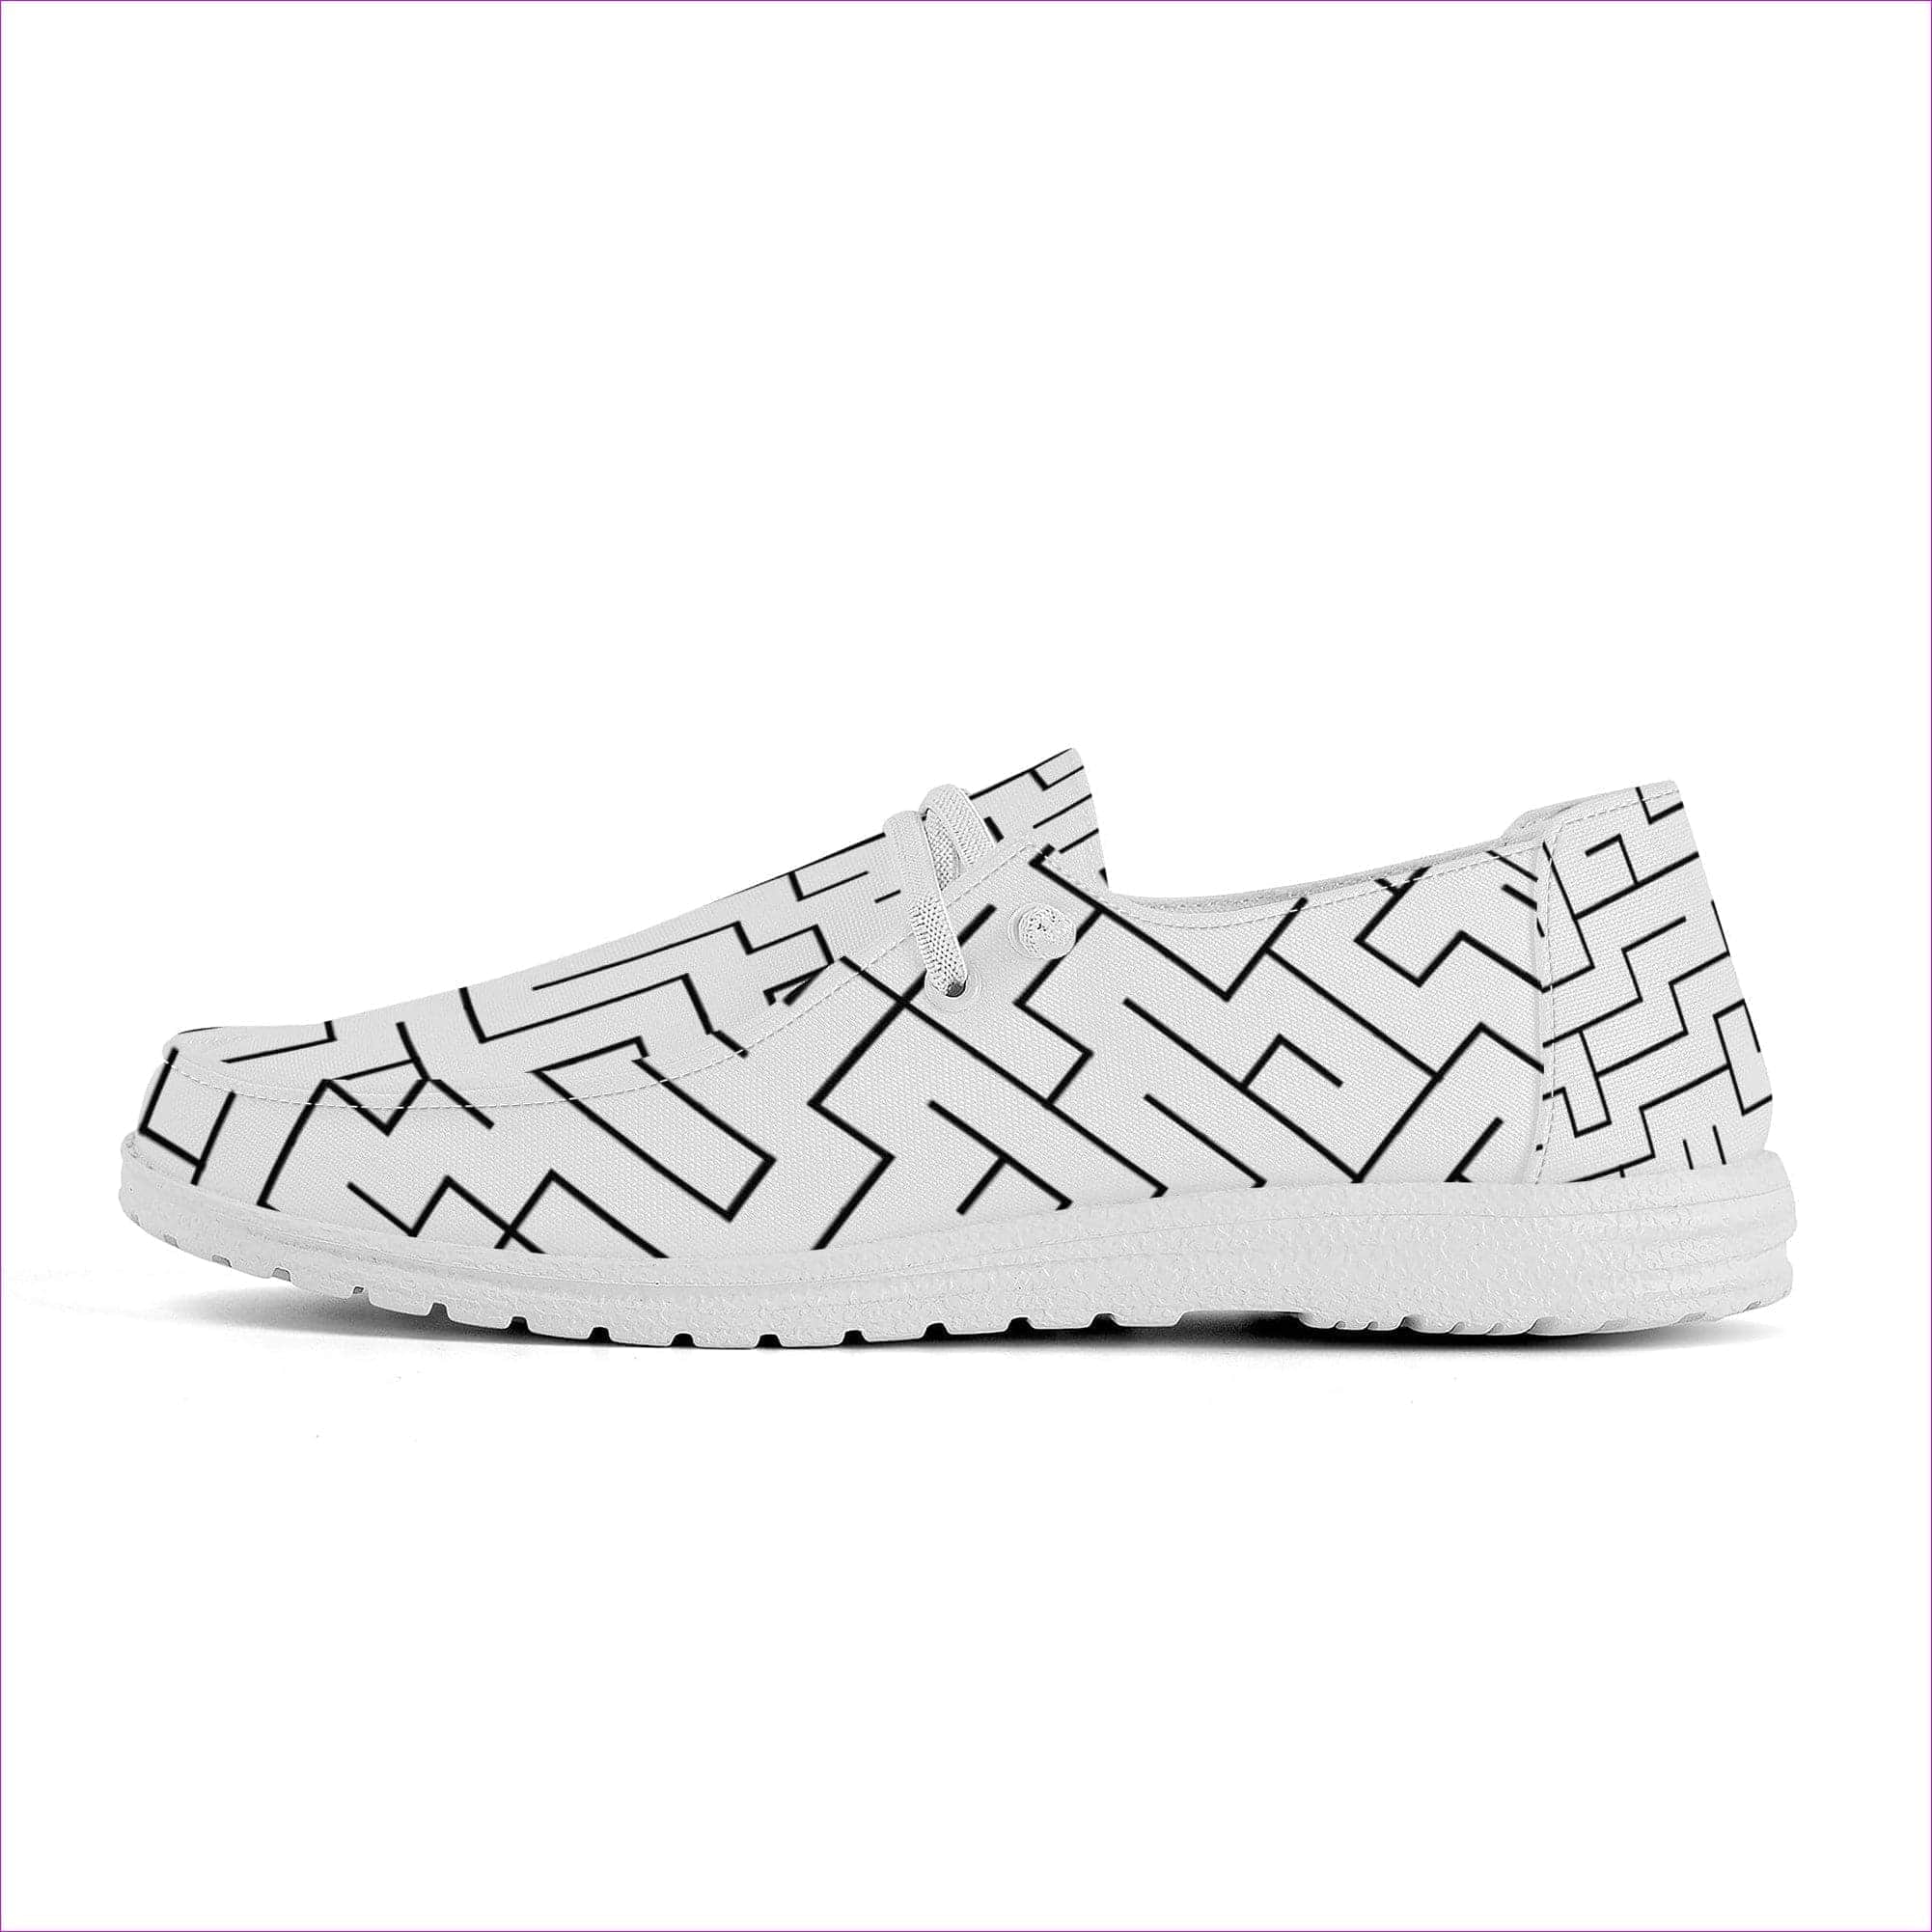 Labyrinth Canvas Slip On Loafers - Unisex Canvas Loafers at TFC&H Co.